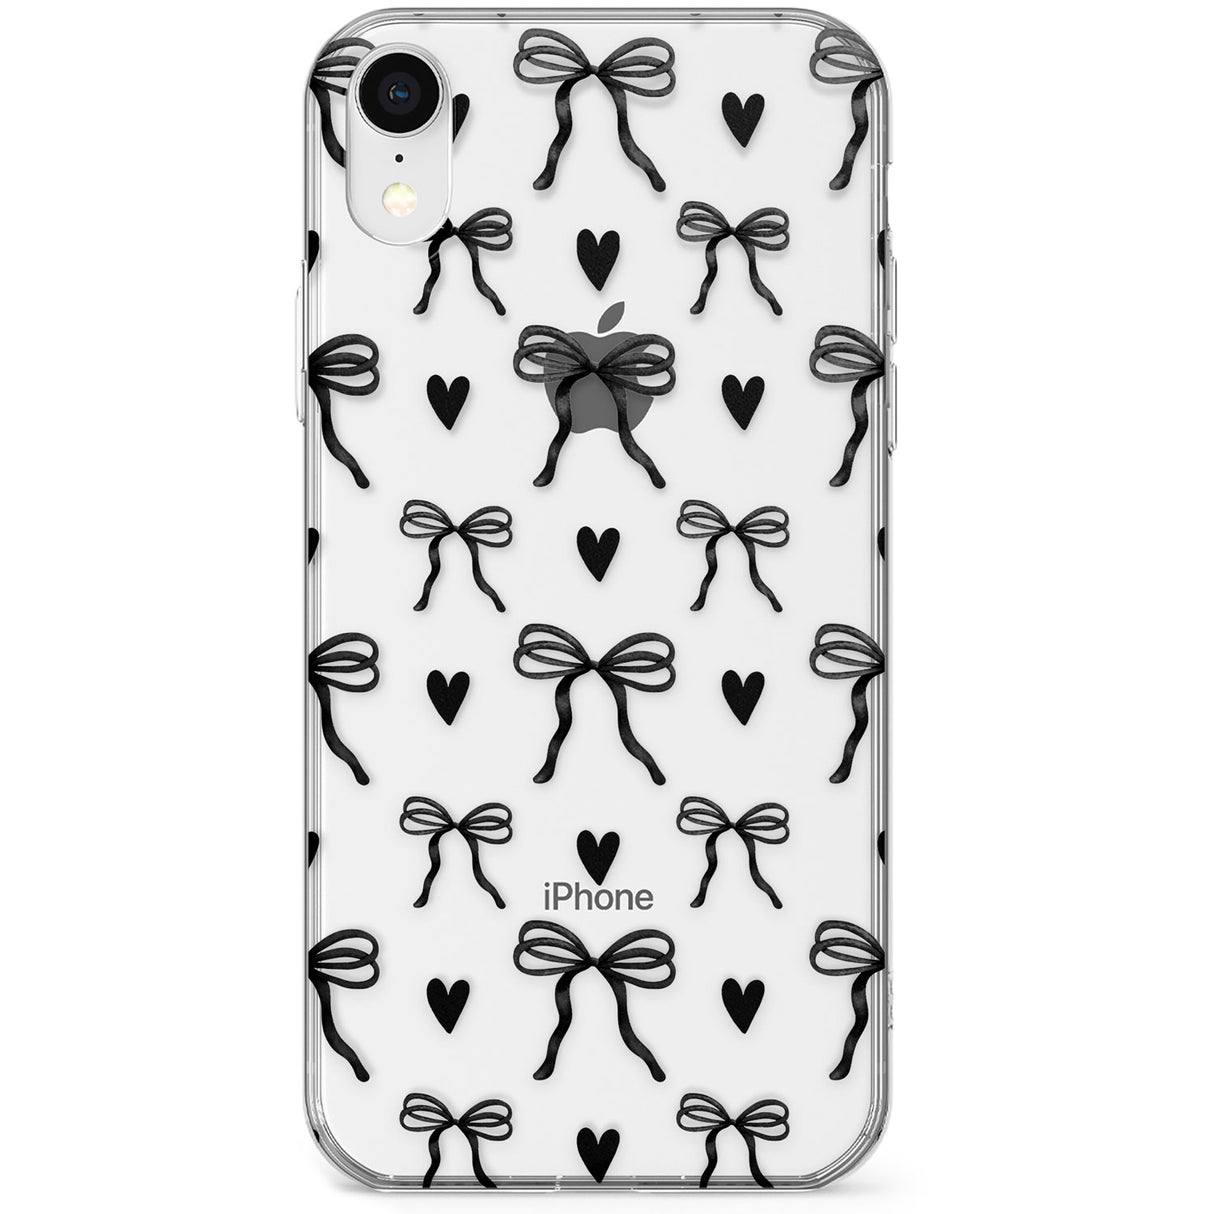 Black Bows & Hearts Phone Case for iPhone X, XS Max, XR